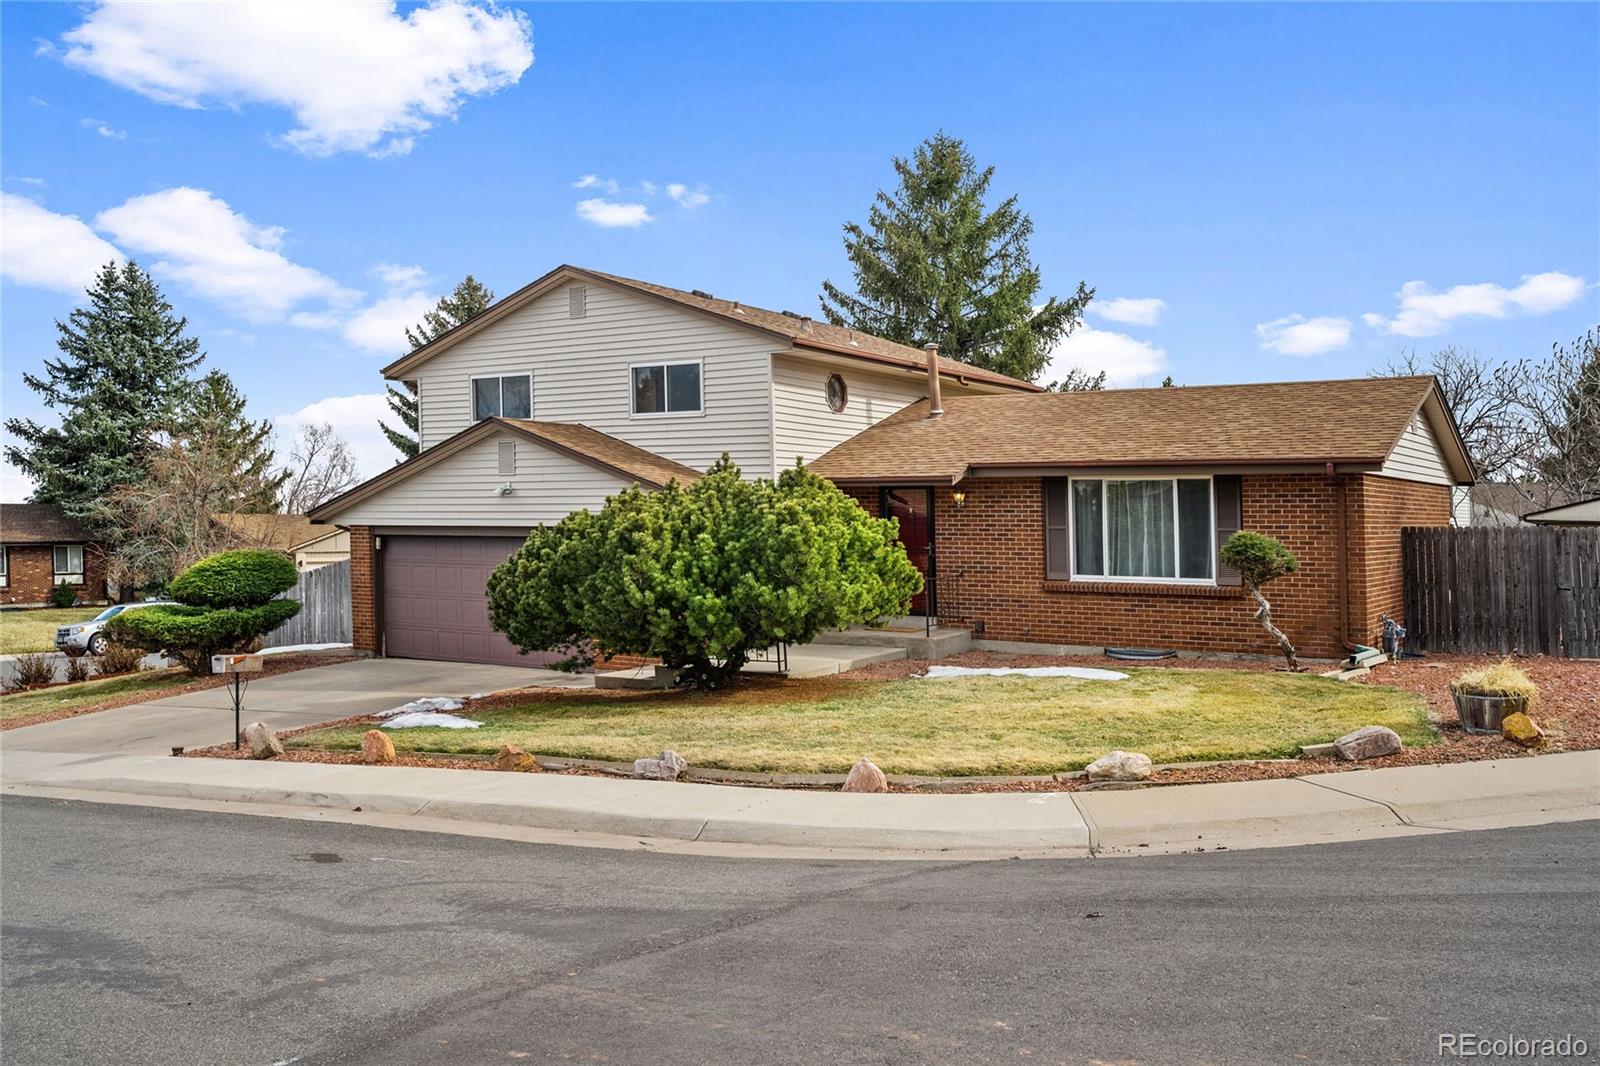 11228 w colorado place, Lakewood sold home. Closed on 2024-03-22 for $651,500.